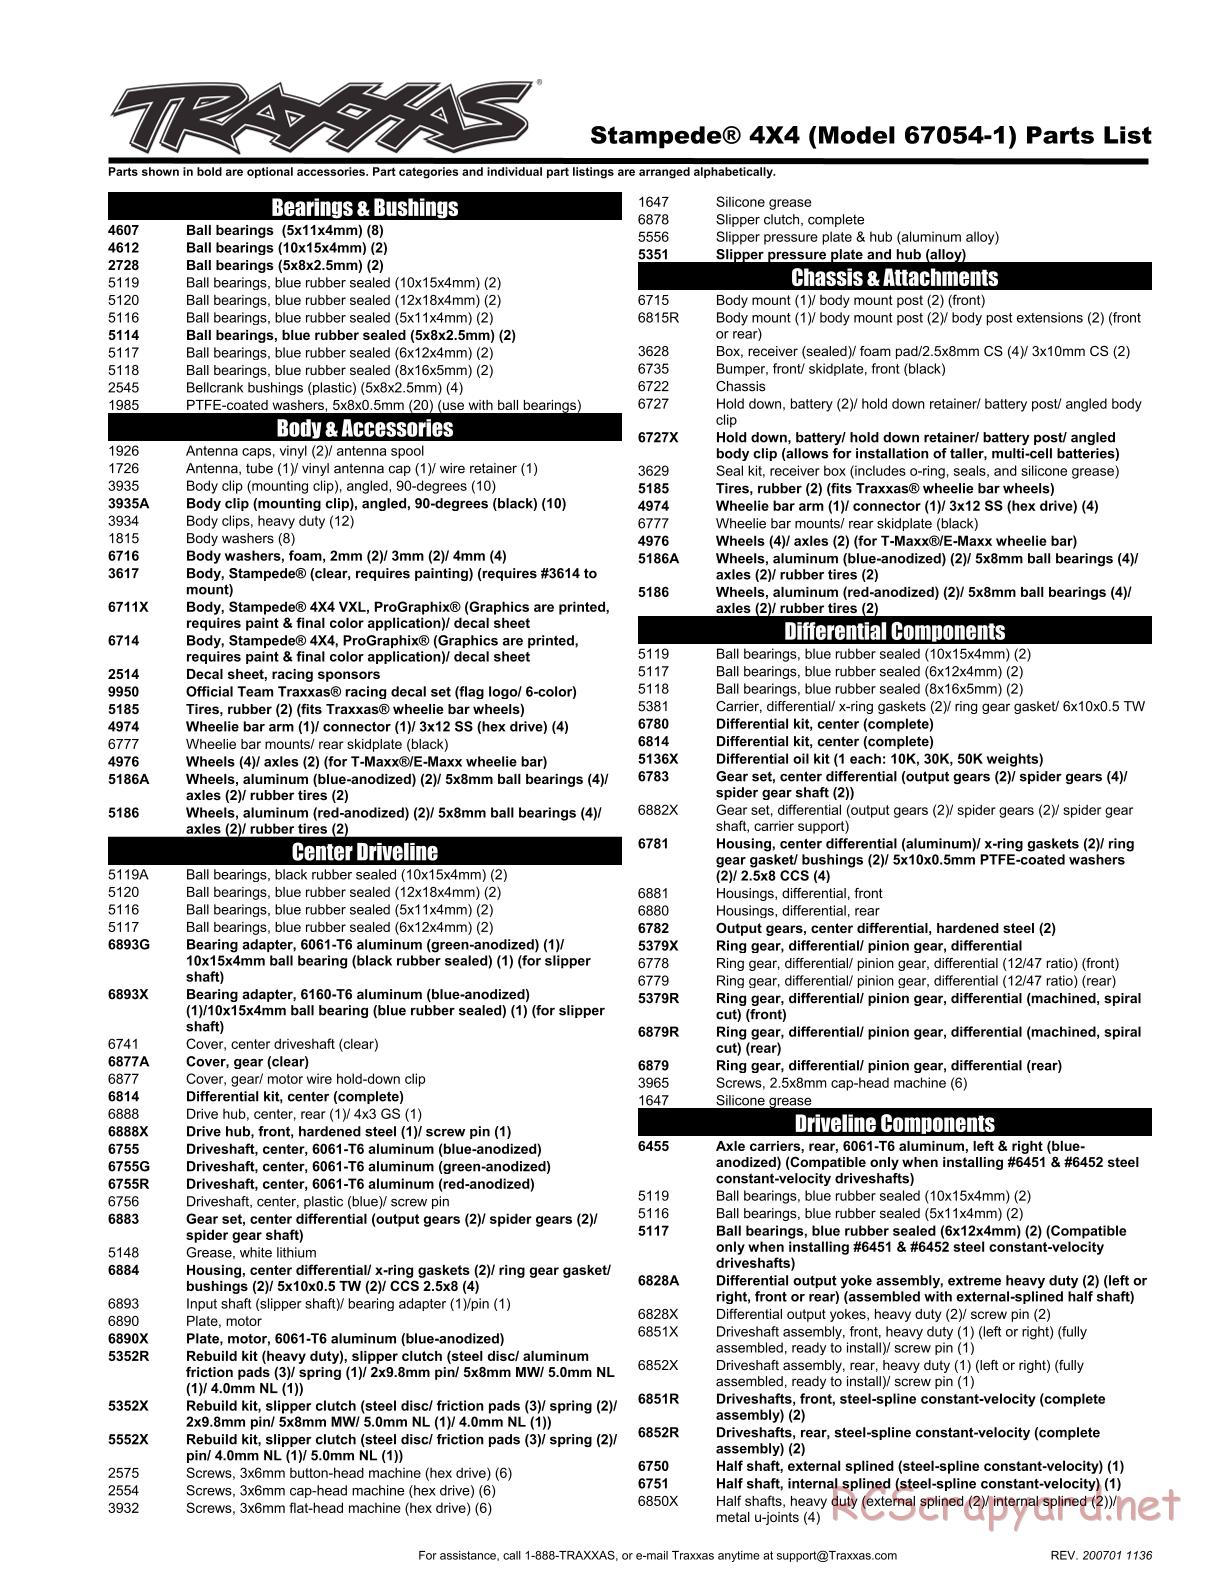 Traxxas - Stampede 4x4 - Parts List - Page 1